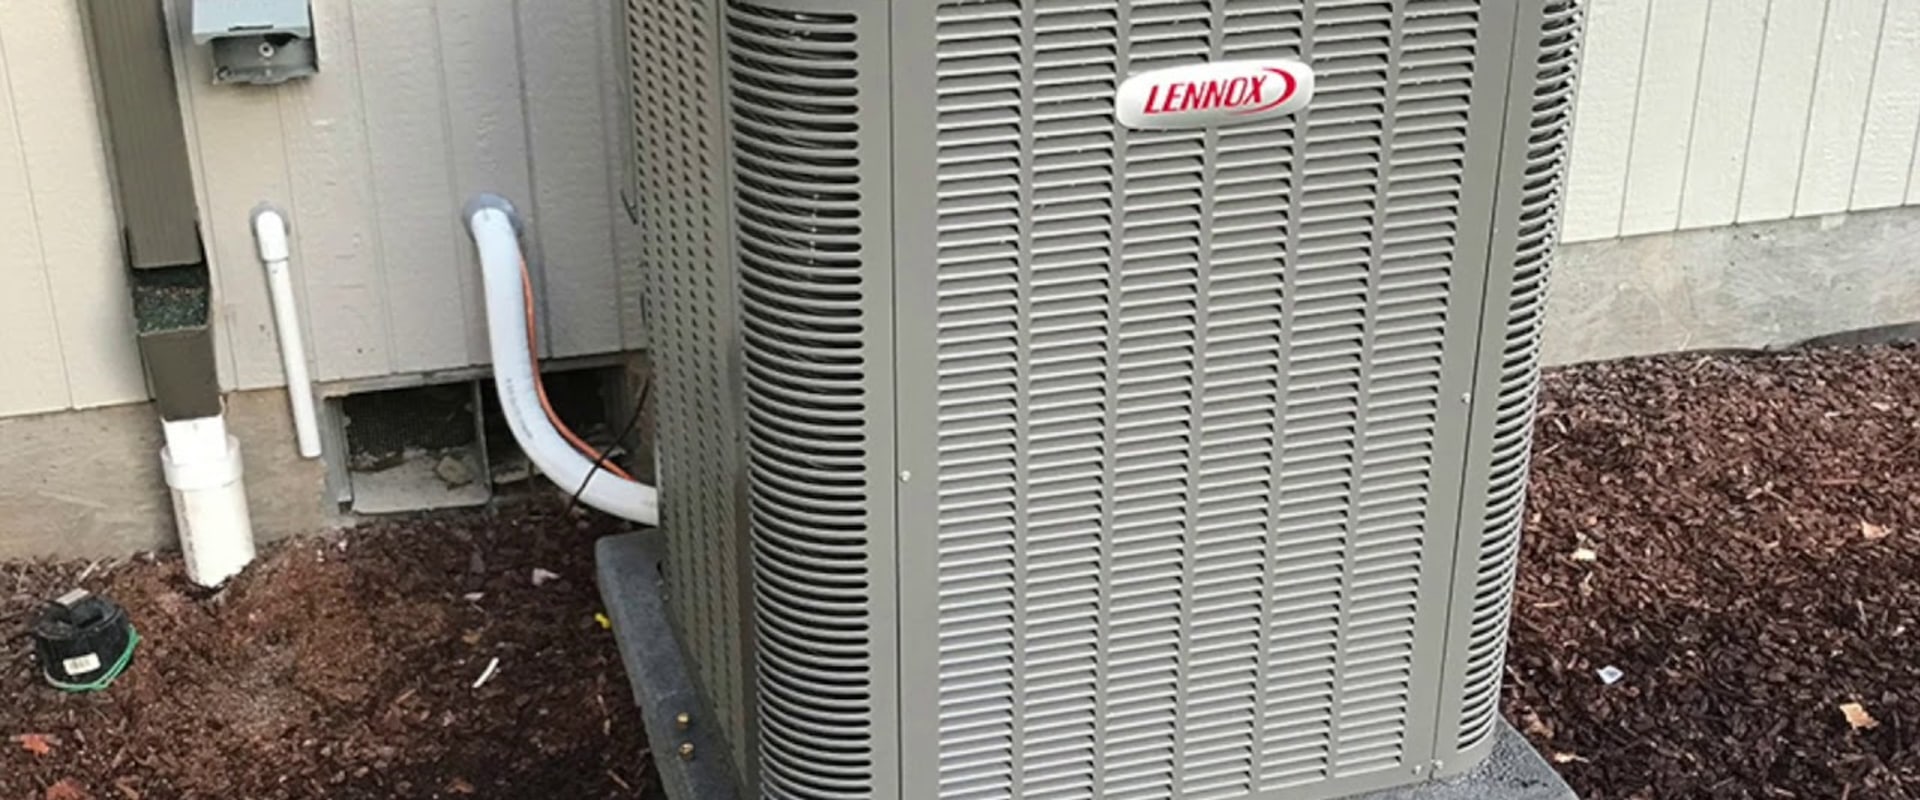 Can You Use a Heat Pump with an Air Handler?